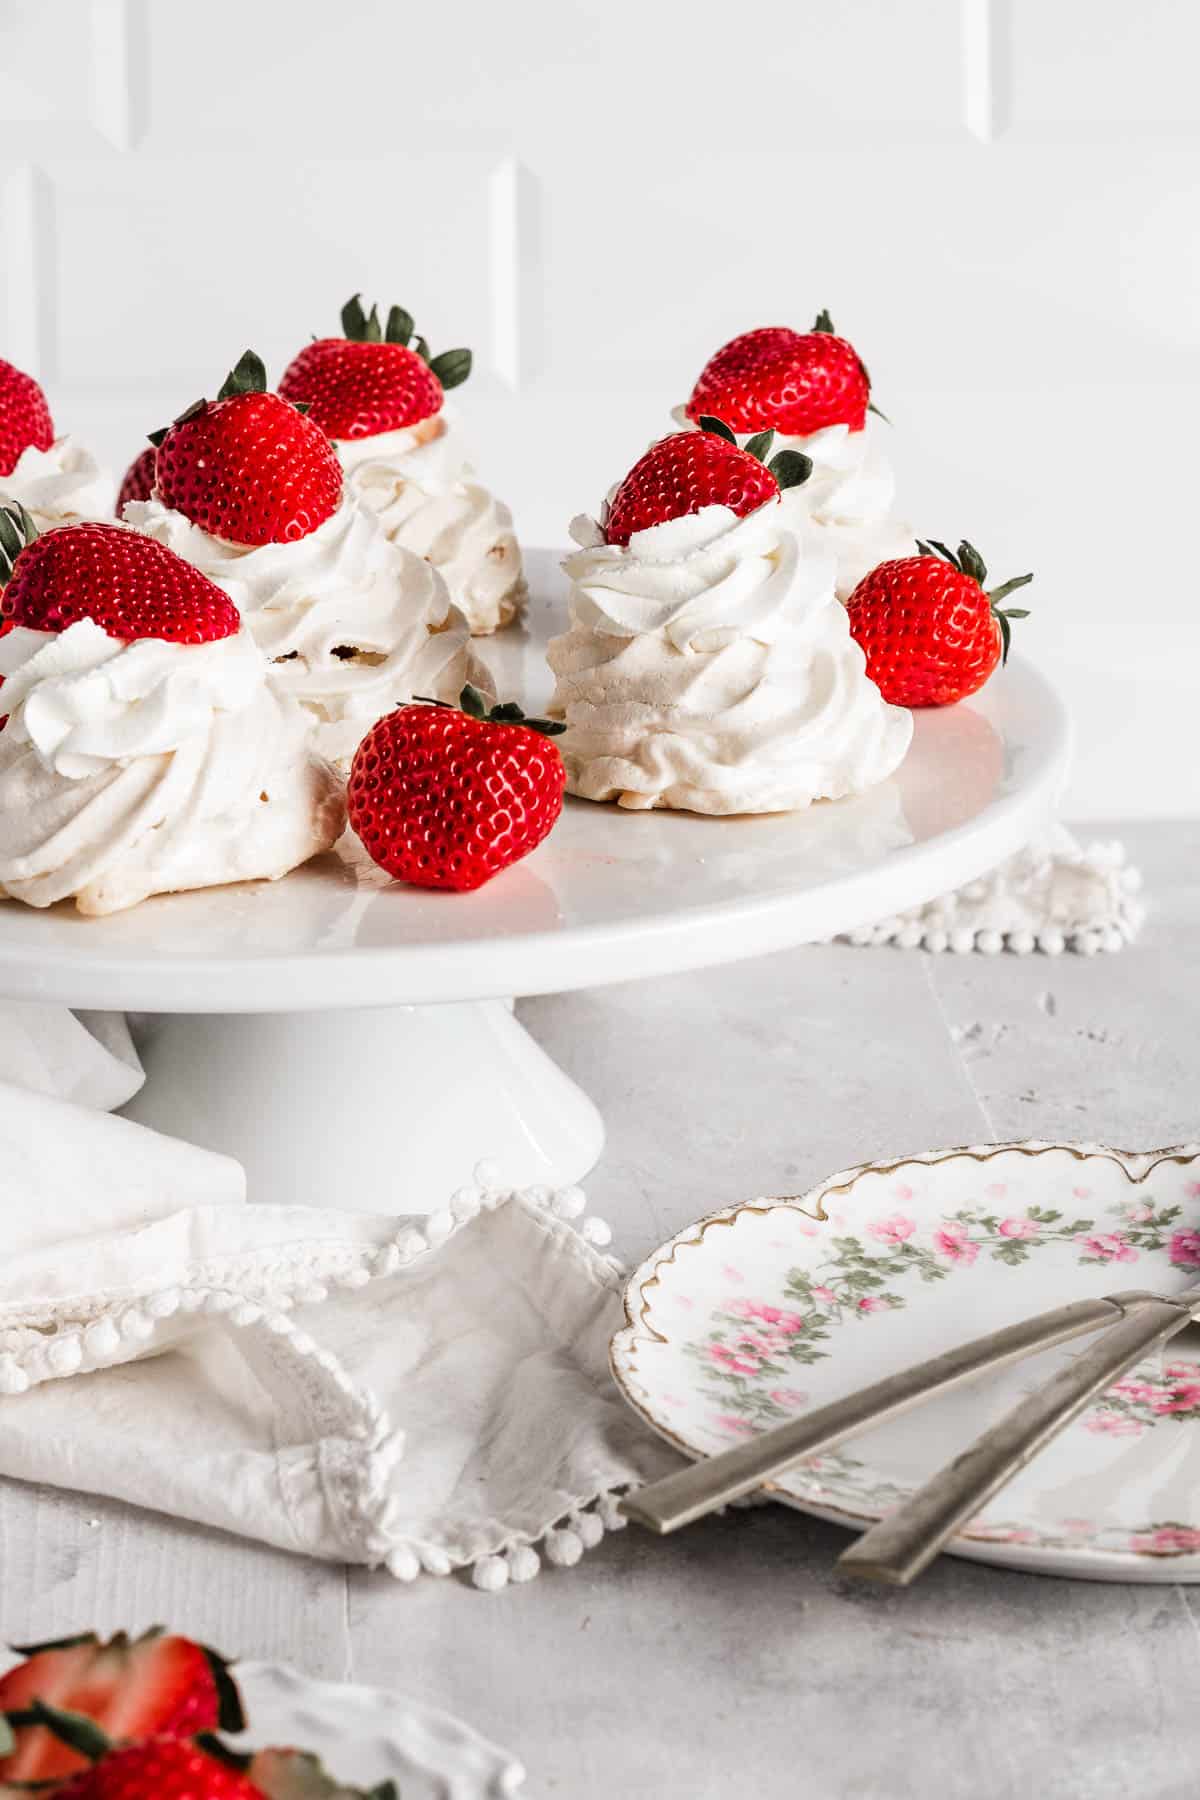 Mini pavlovas on a cake plate topped with whipped cream and strawberries